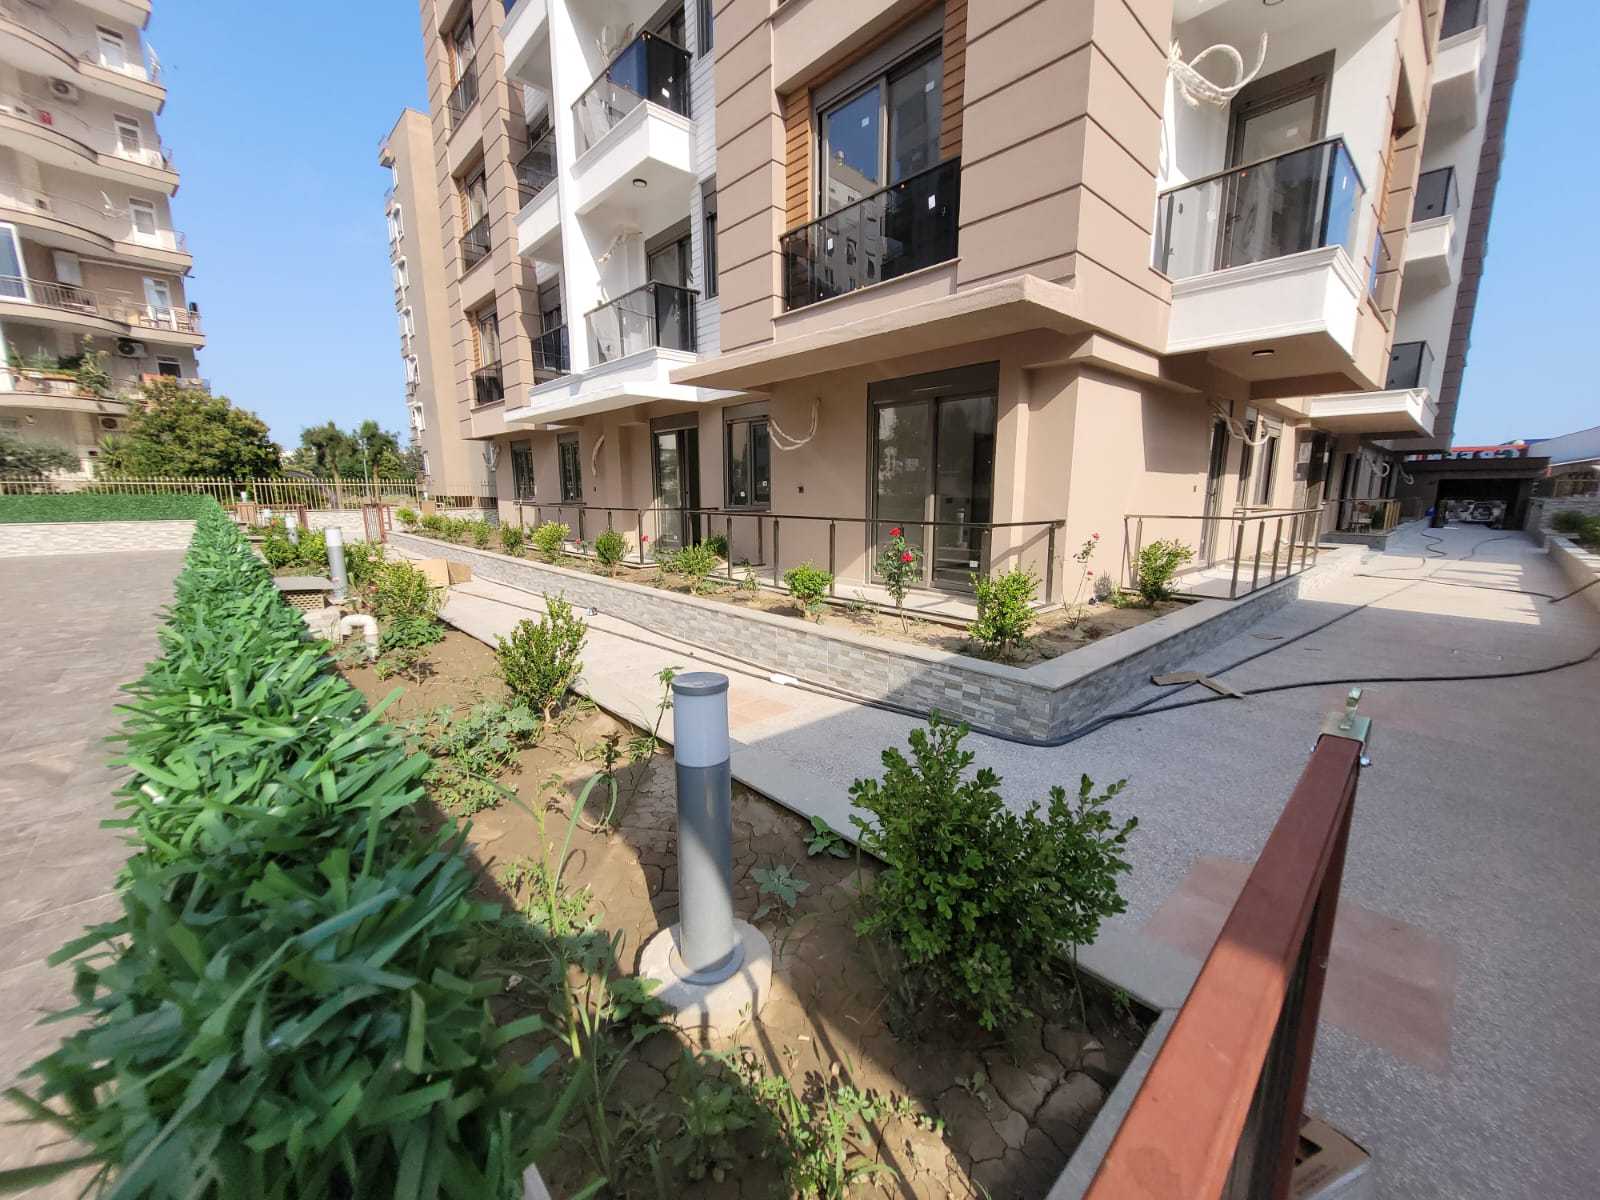 Apartments for Sale in Antalya Konyaaltı within Green Life Residence Compound